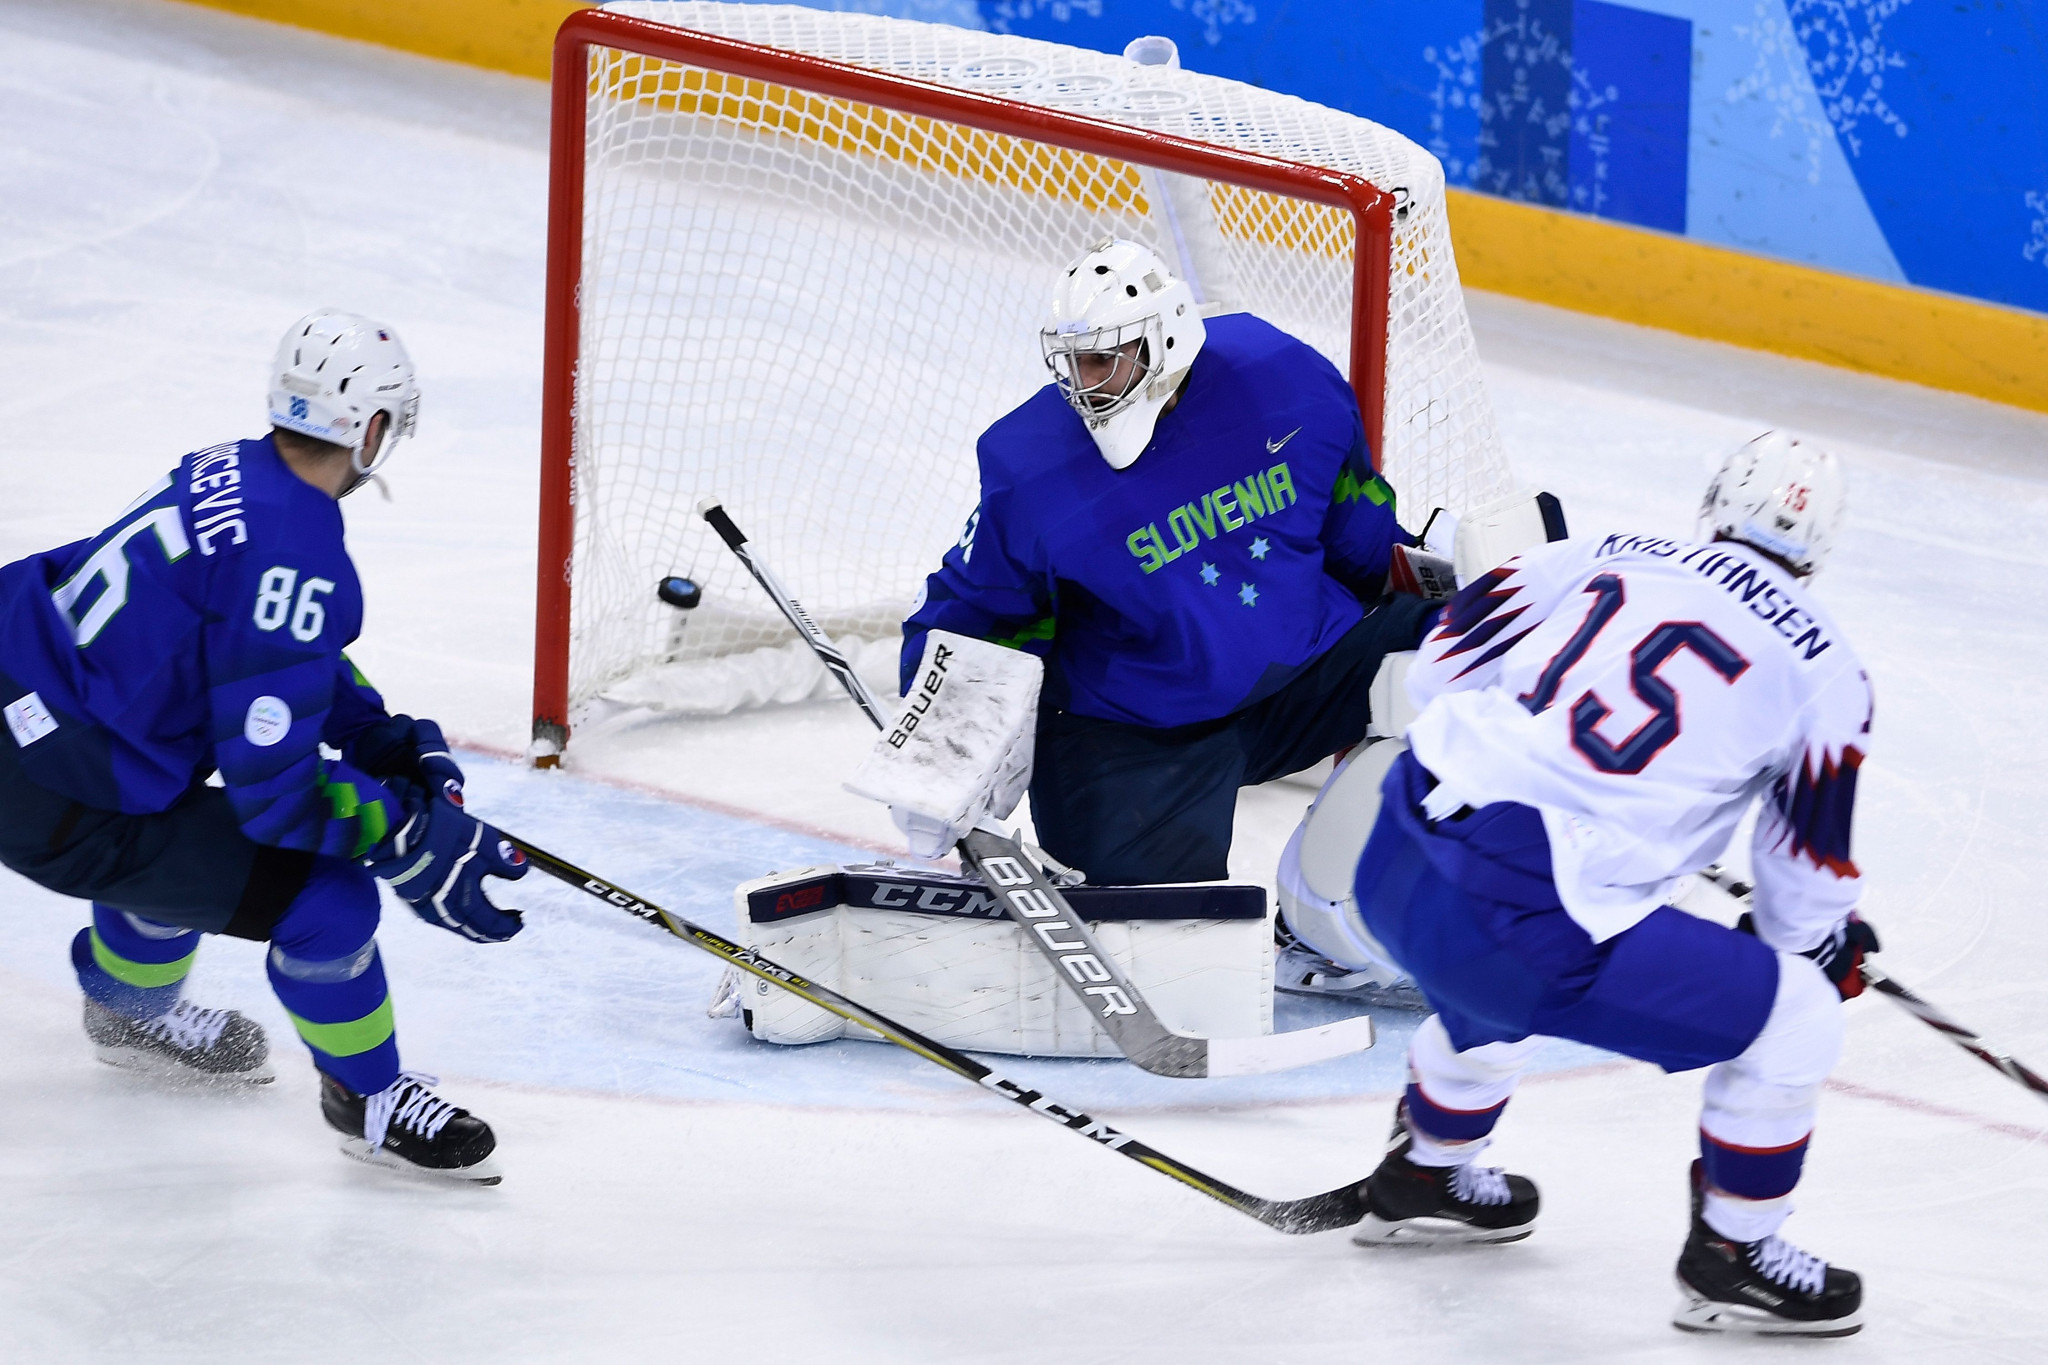 Slovenia will look to return to the top level of the World Championship ©Getty Images